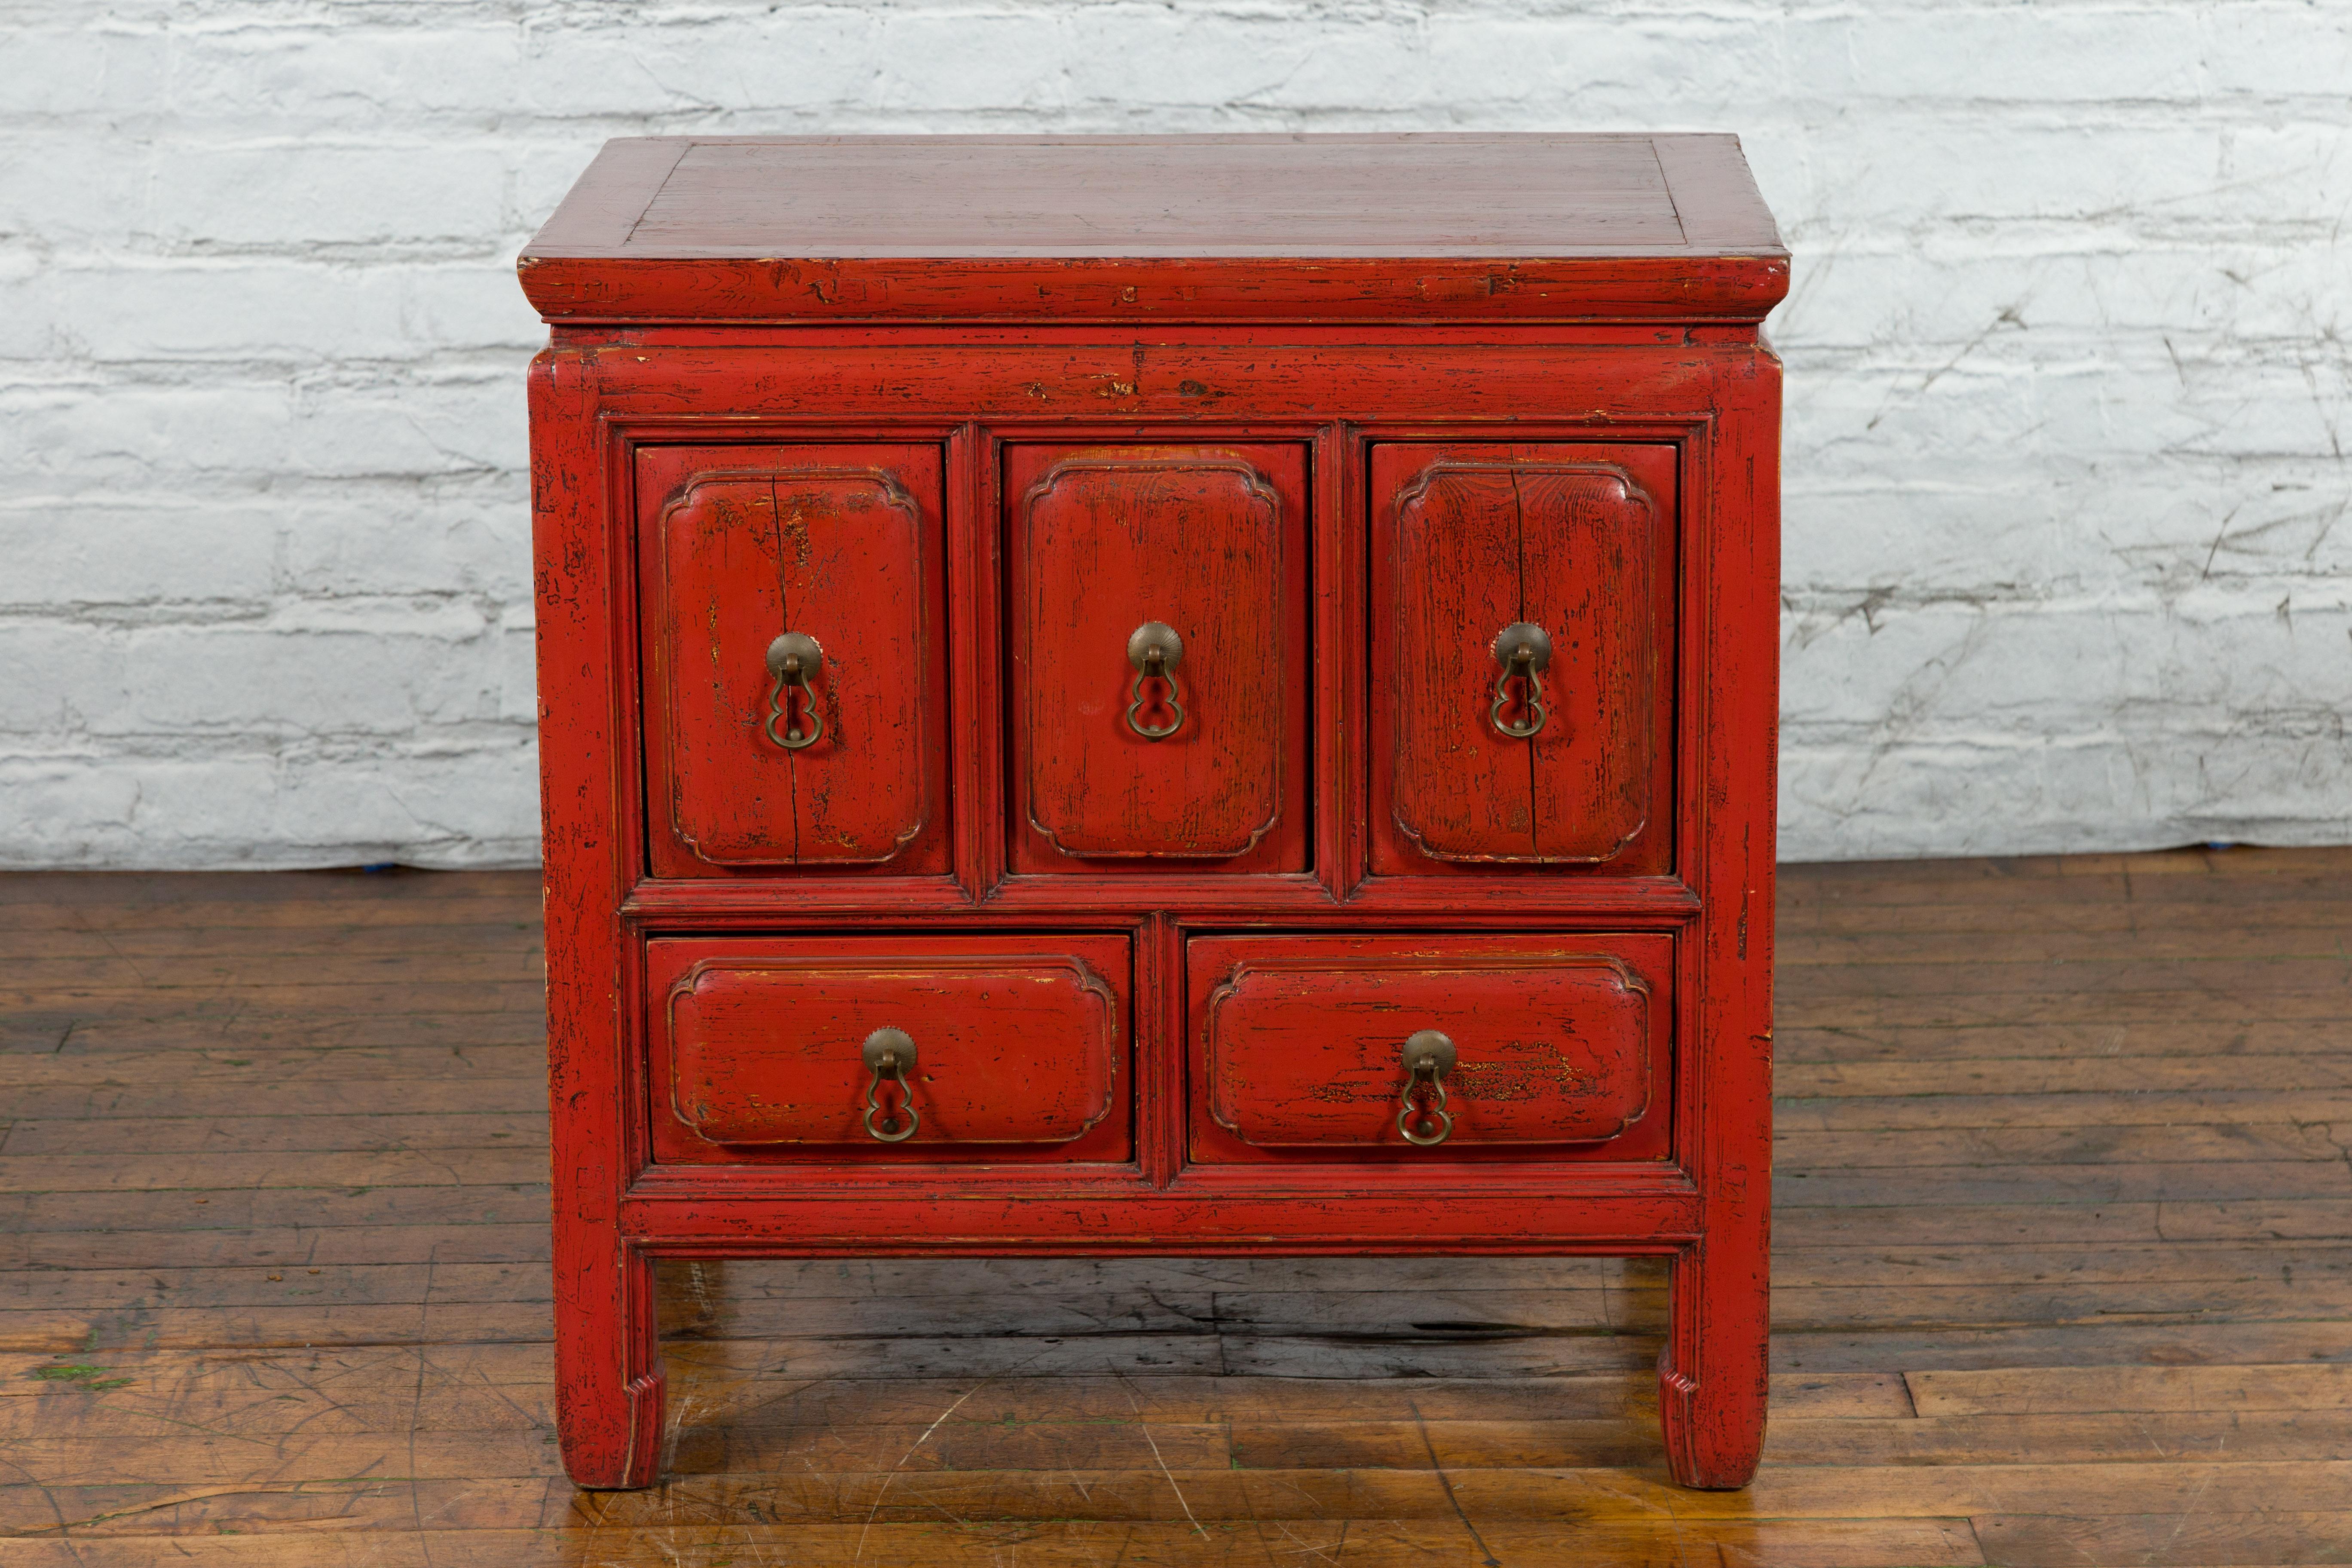 A Chinese Qing Dynasty period red lacquer side chest from the 19th century with five hand-carved raised drawers, hints of a black lacquer and horse hoof legs. Created in China during the Qing Dynasty, this side cabinet features a linear silhouette